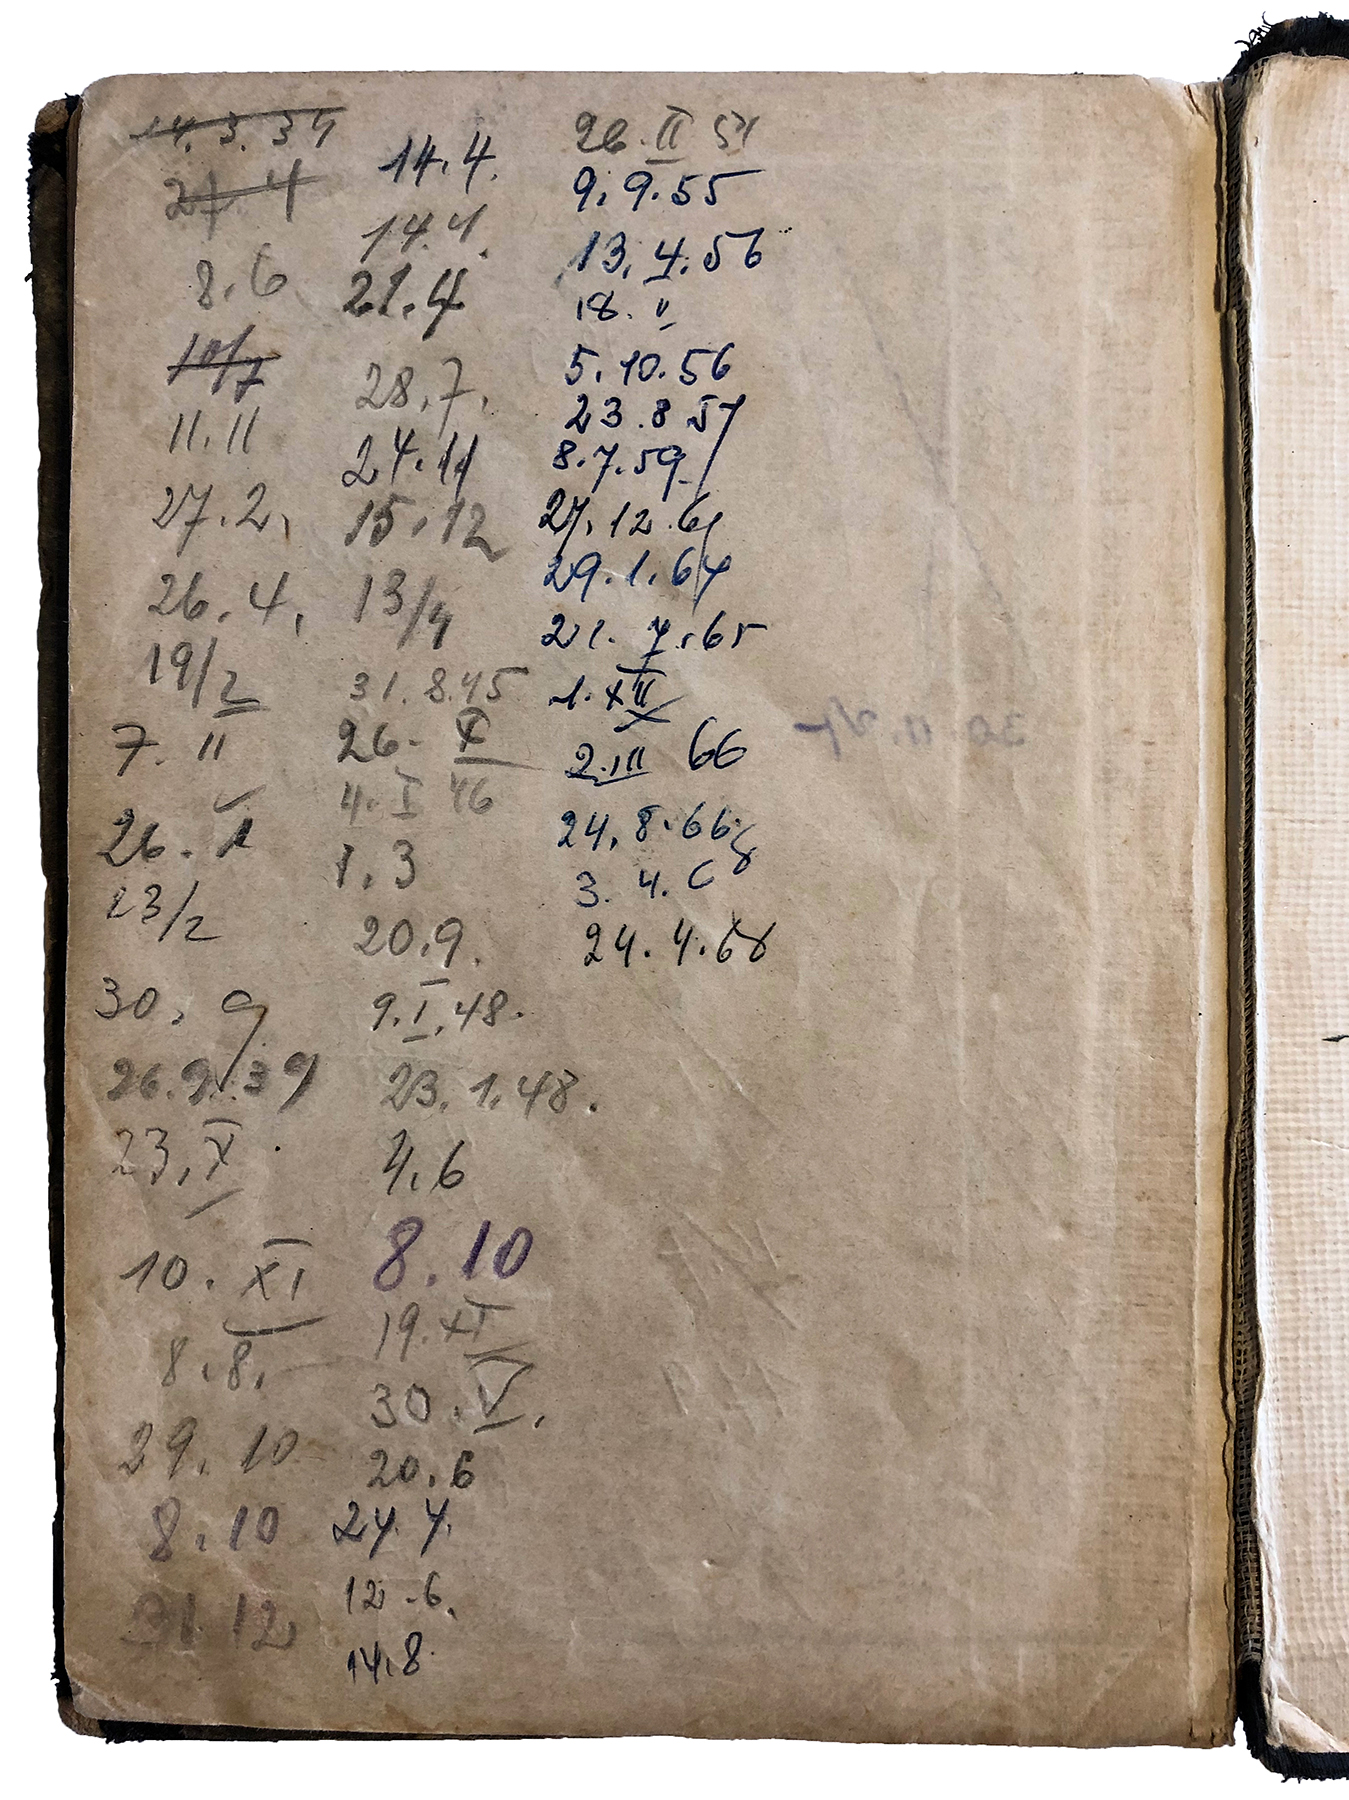 The loan notes on the endpapers attest to the fact that Kollontai's volume was regularly borrowed over the years. (Image: ZB Zürich)